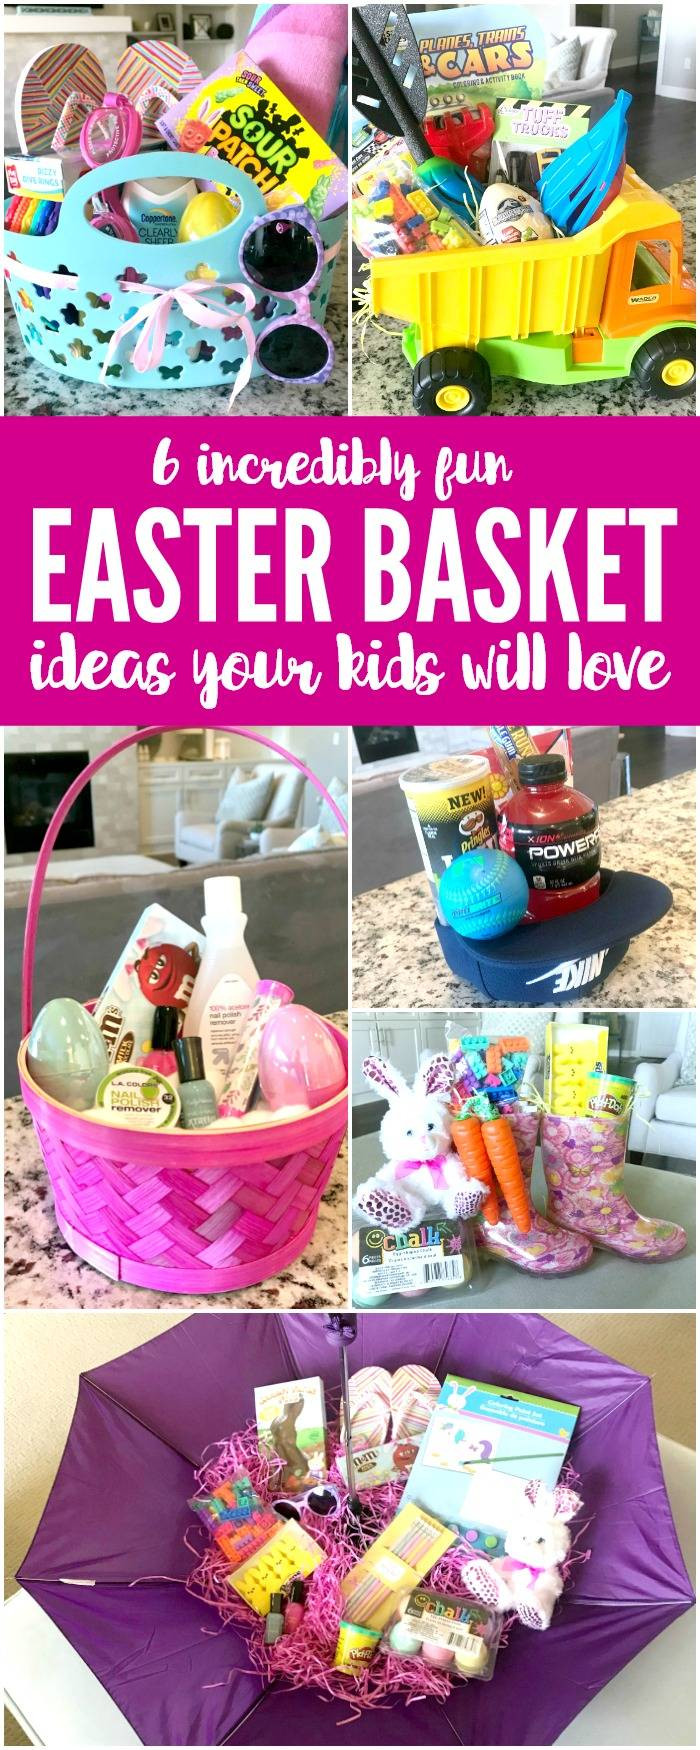 Ideas For Kids Easter Baskets
 6 Amazing Easter Basket Ideas to Try This Year Passion